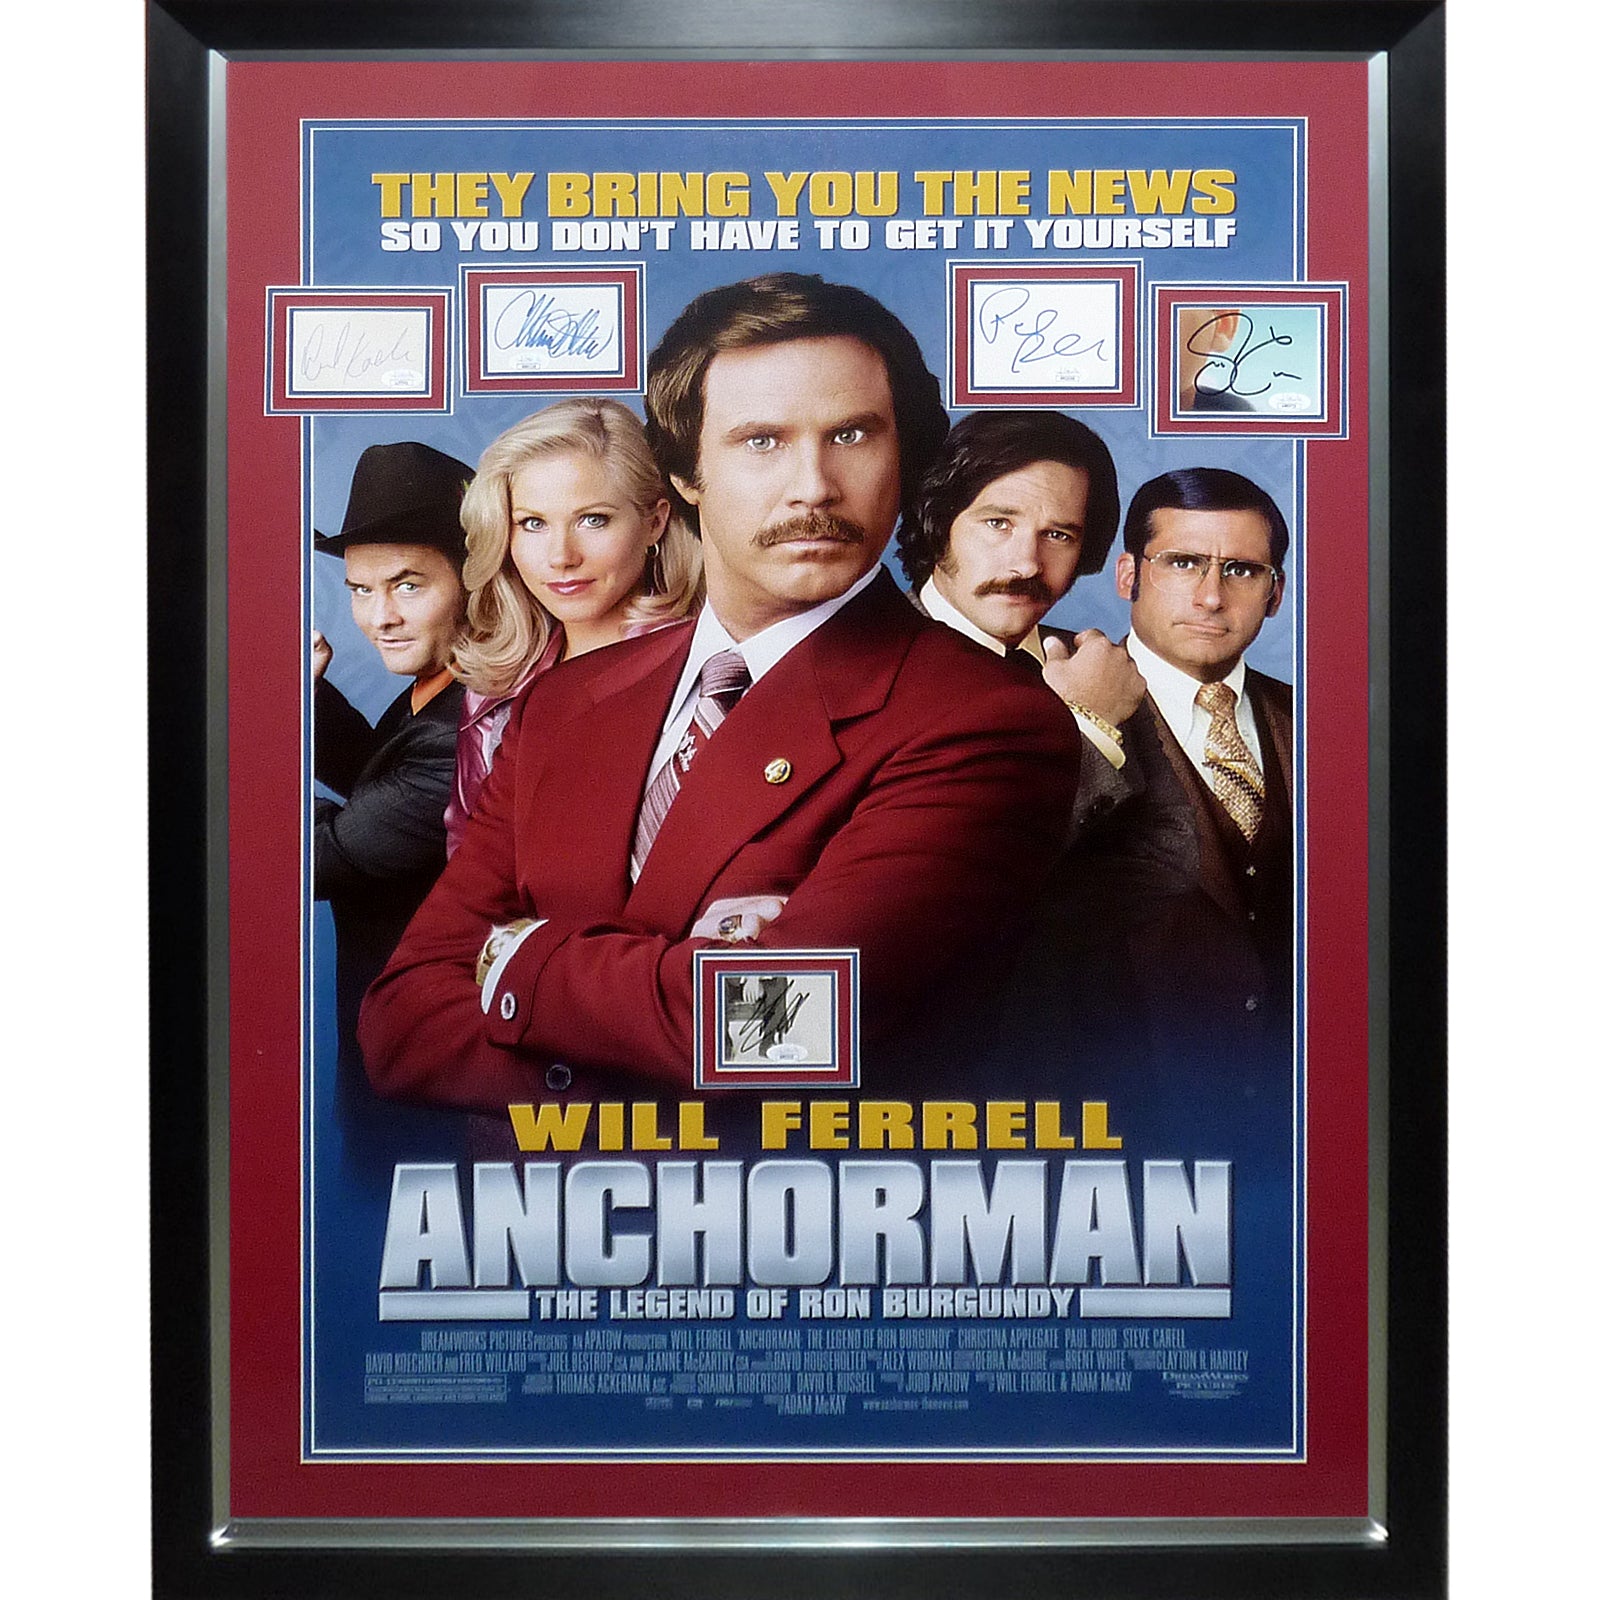 Anchorman Full-Size Movie Poster Deluxe Framed with Will Ferrell, Carell, Rudd, Applegate and Koechner Autographs - JSA